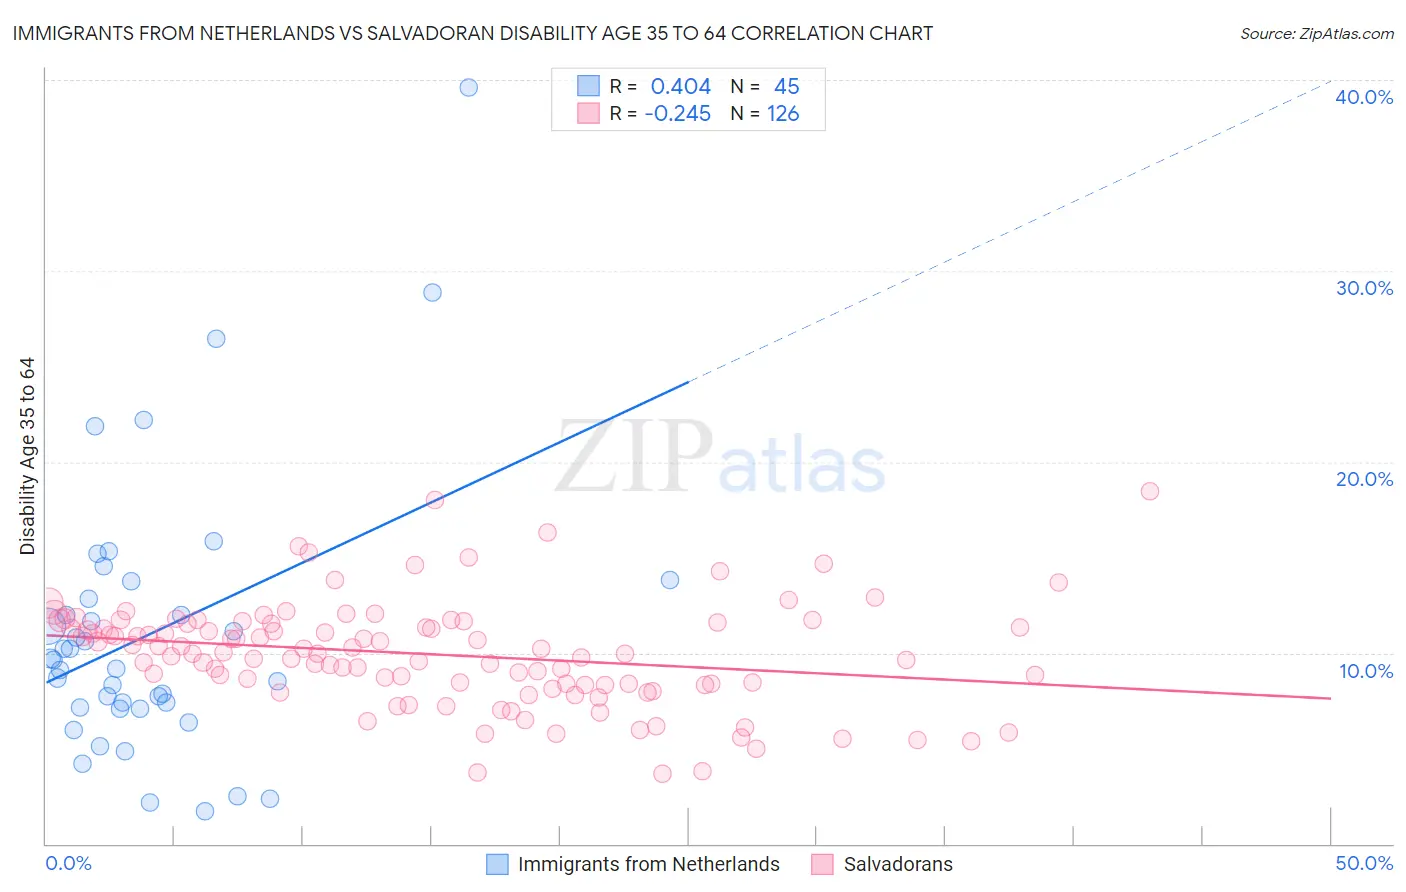 Immigrants from Netherlands vs Salvadoran Disability Age 35 to 64